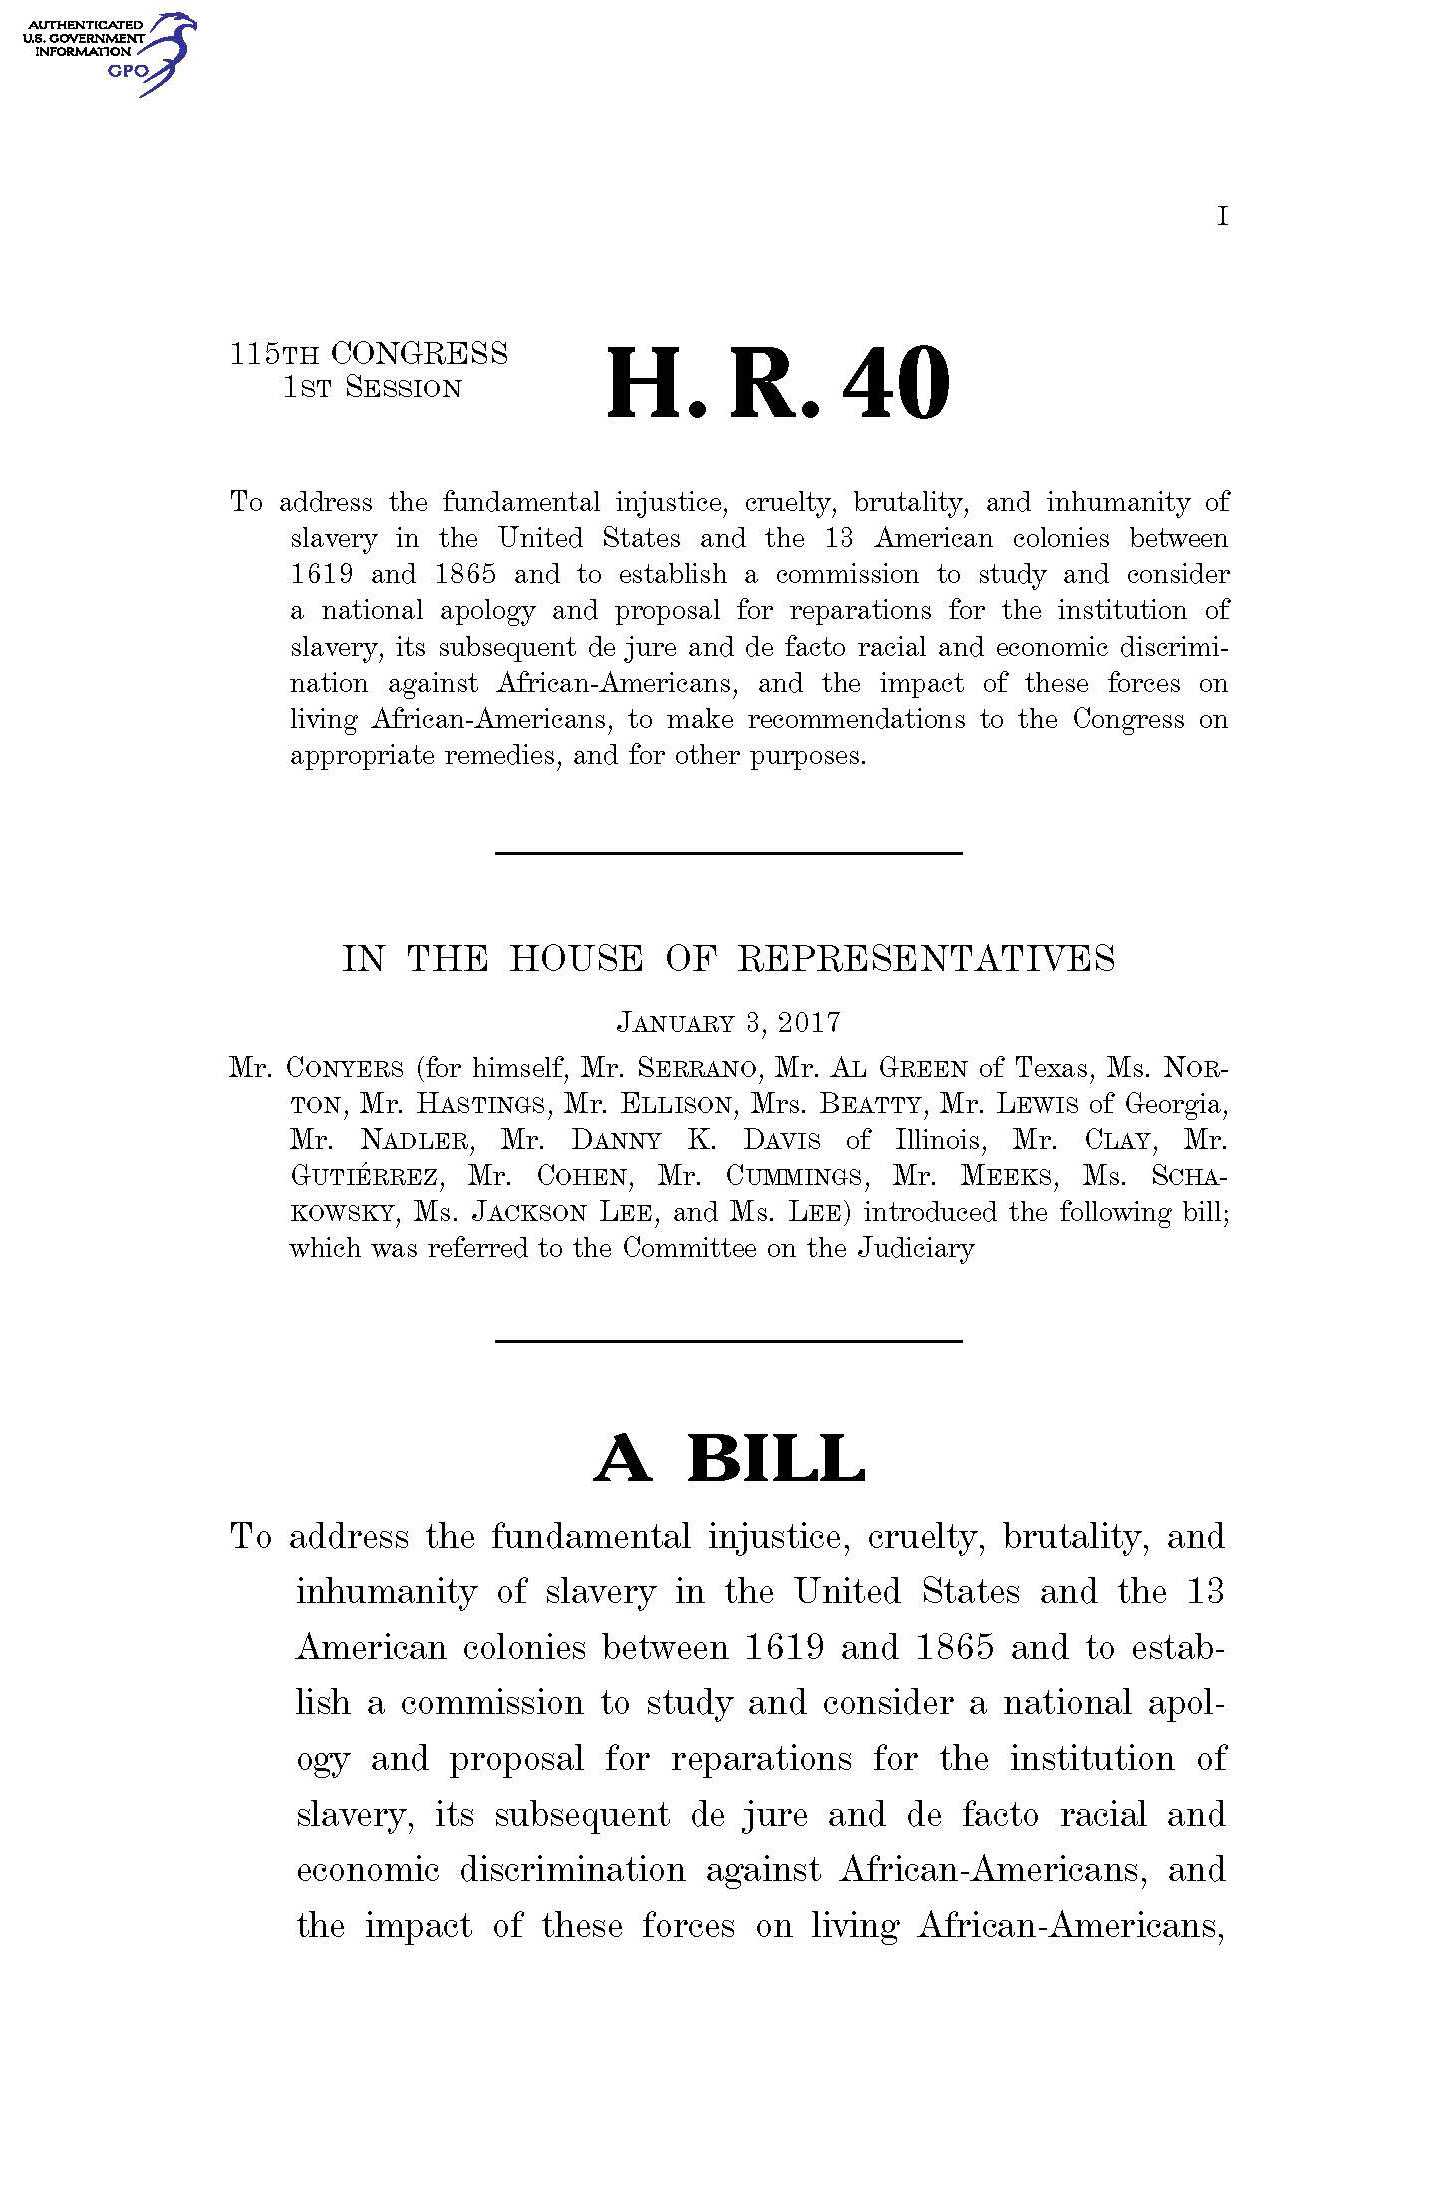 The cover for H.R. 40 bill. It has 3 paragraphs dated January 3, 2017 by the 115th Congress.